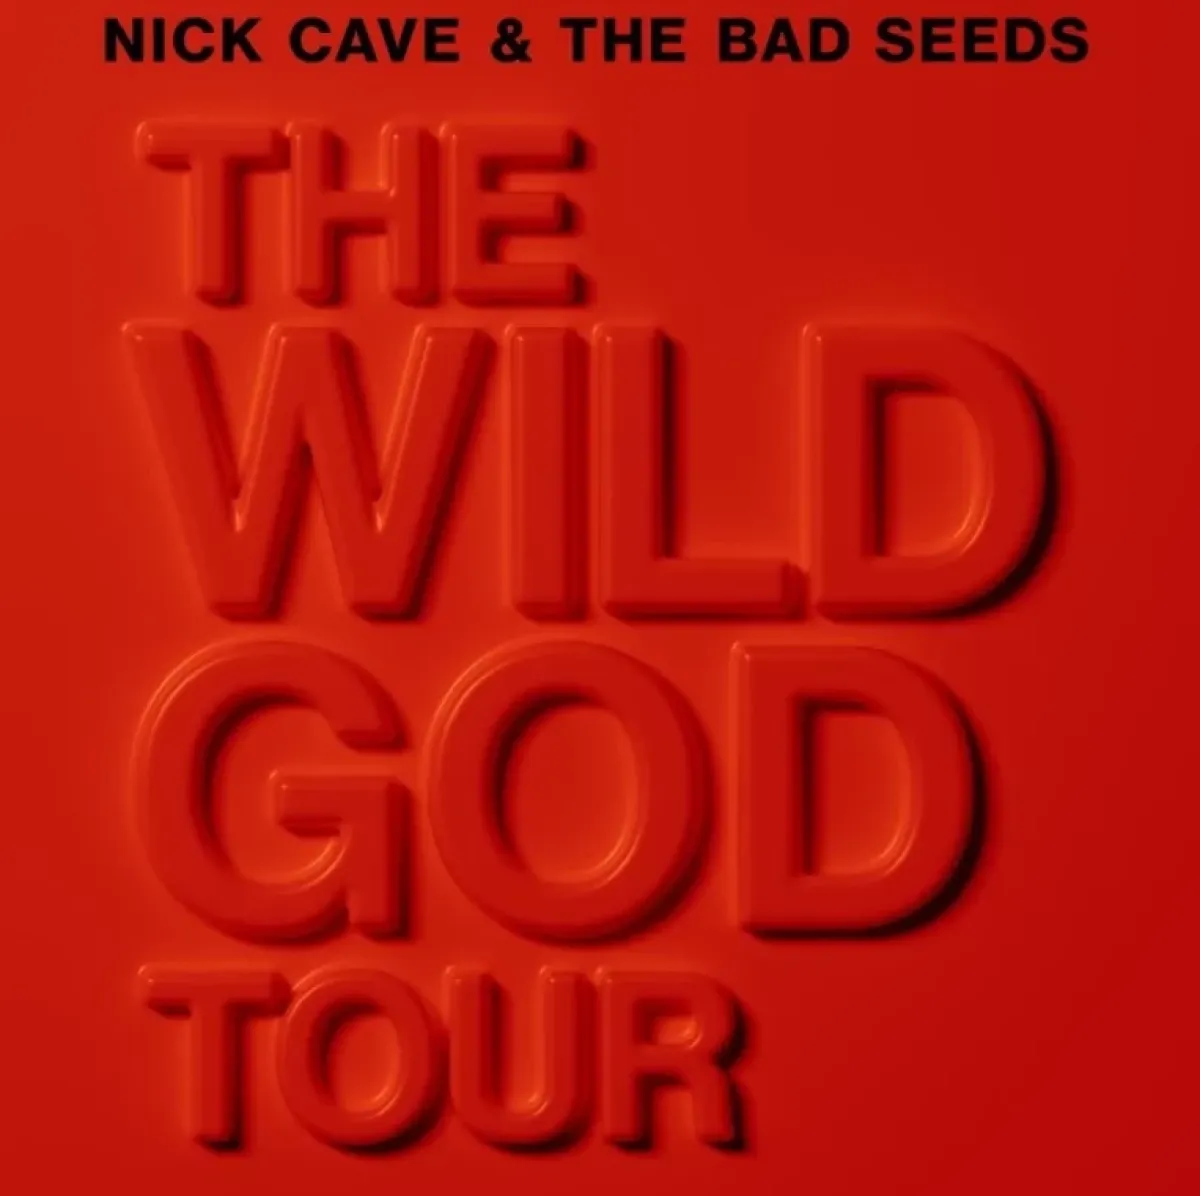 Nick Cave And The Bad Seeds at Oslo Spektrum Tickets